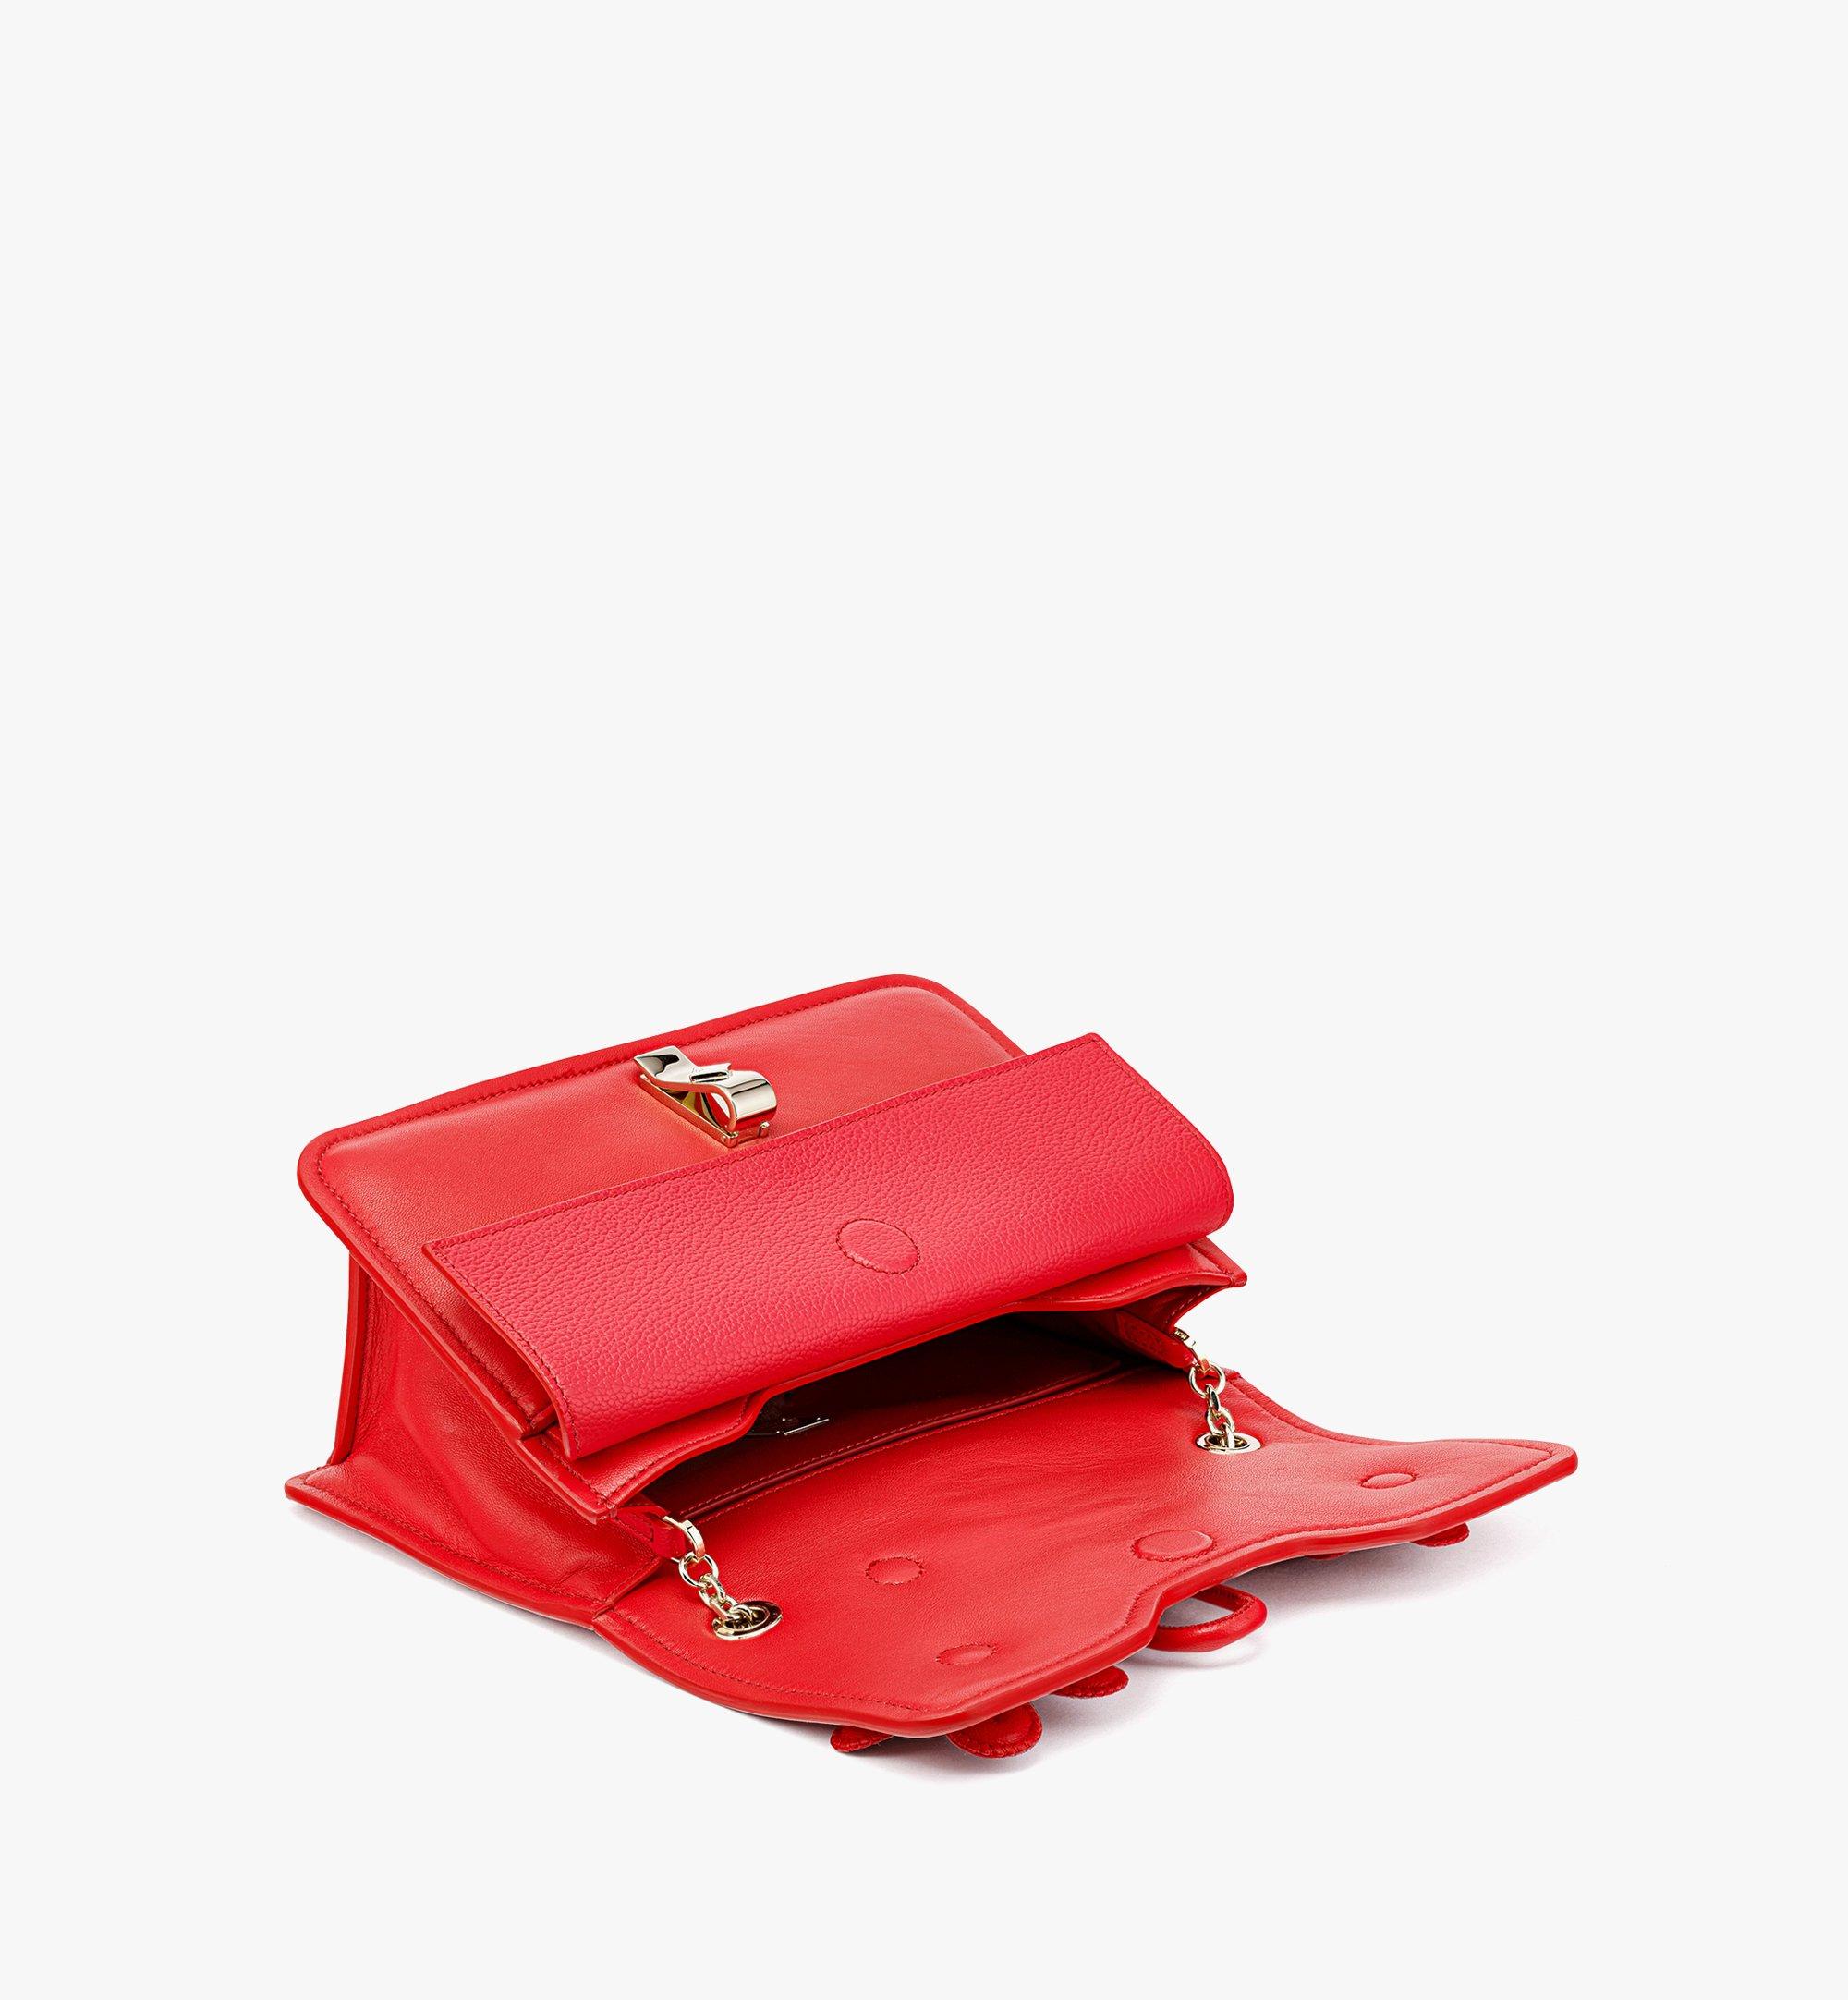 MCM Upcycling Project M Candy Shoulder Bag in Lambskin Nappa Leather Red MWSBAUP03R4001 Alternate View 2